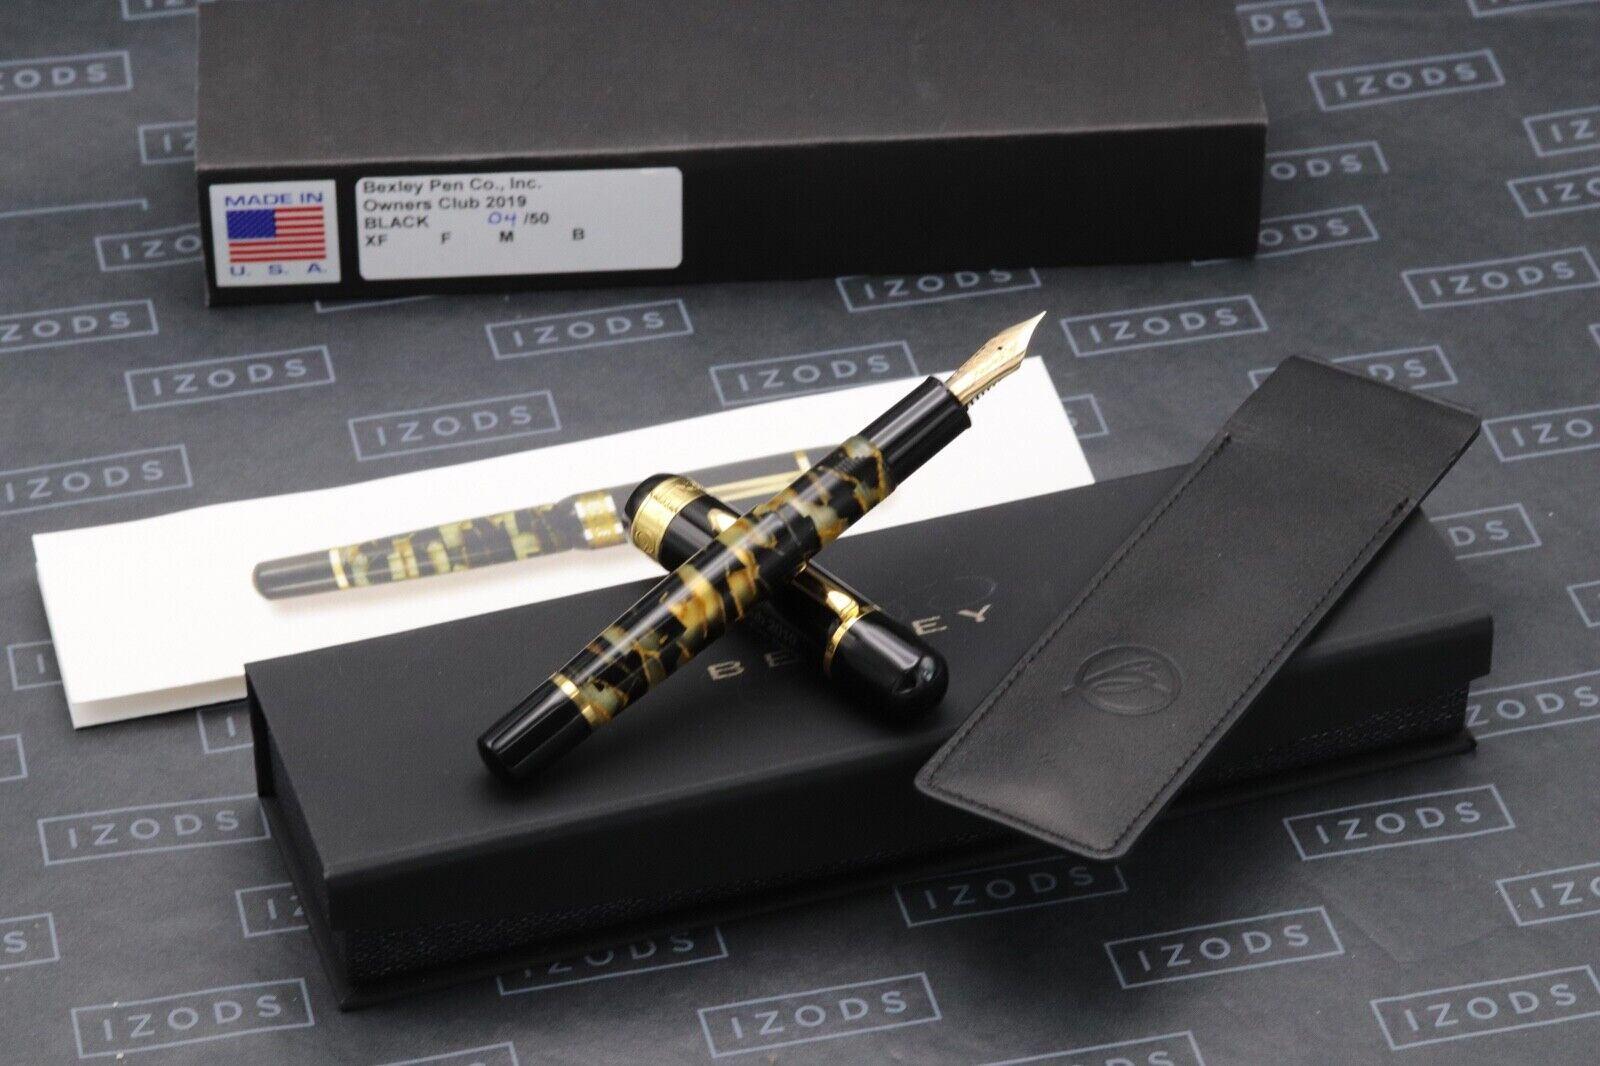 Bexley 2019 Owners Club Black Lucens Limited Edition Fountain Pen